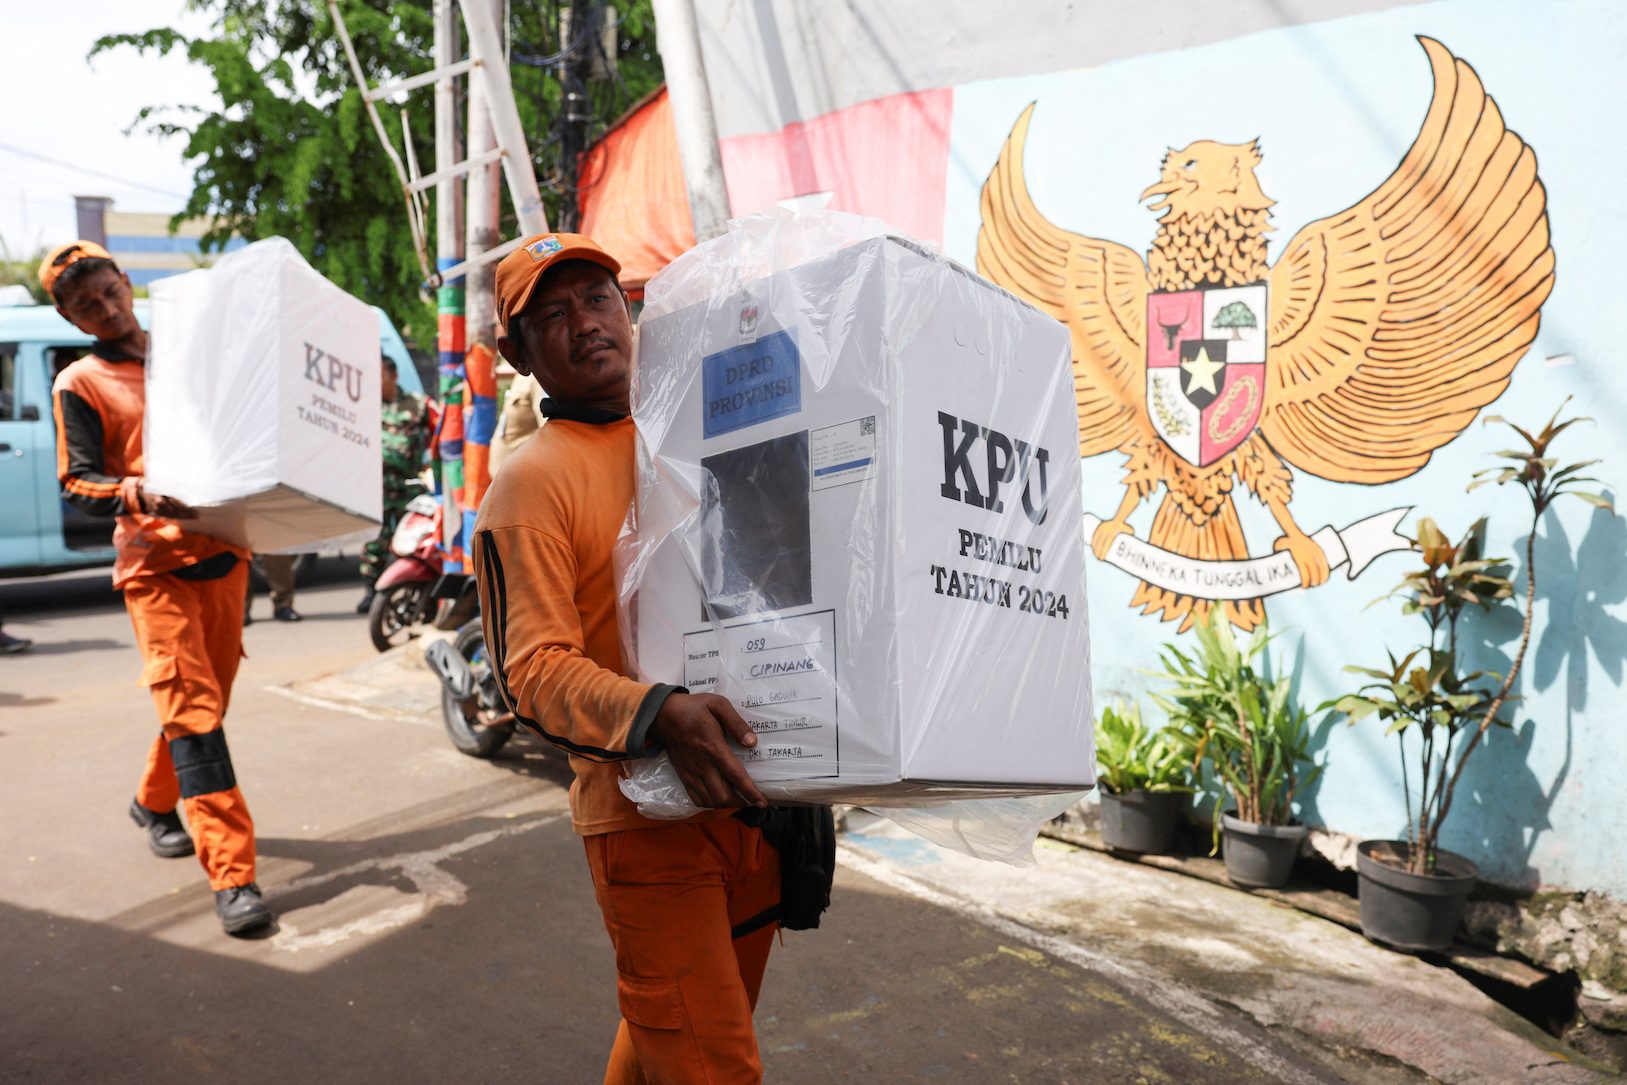 Indonesia in final stretch ahead of world’s biggest single-day election